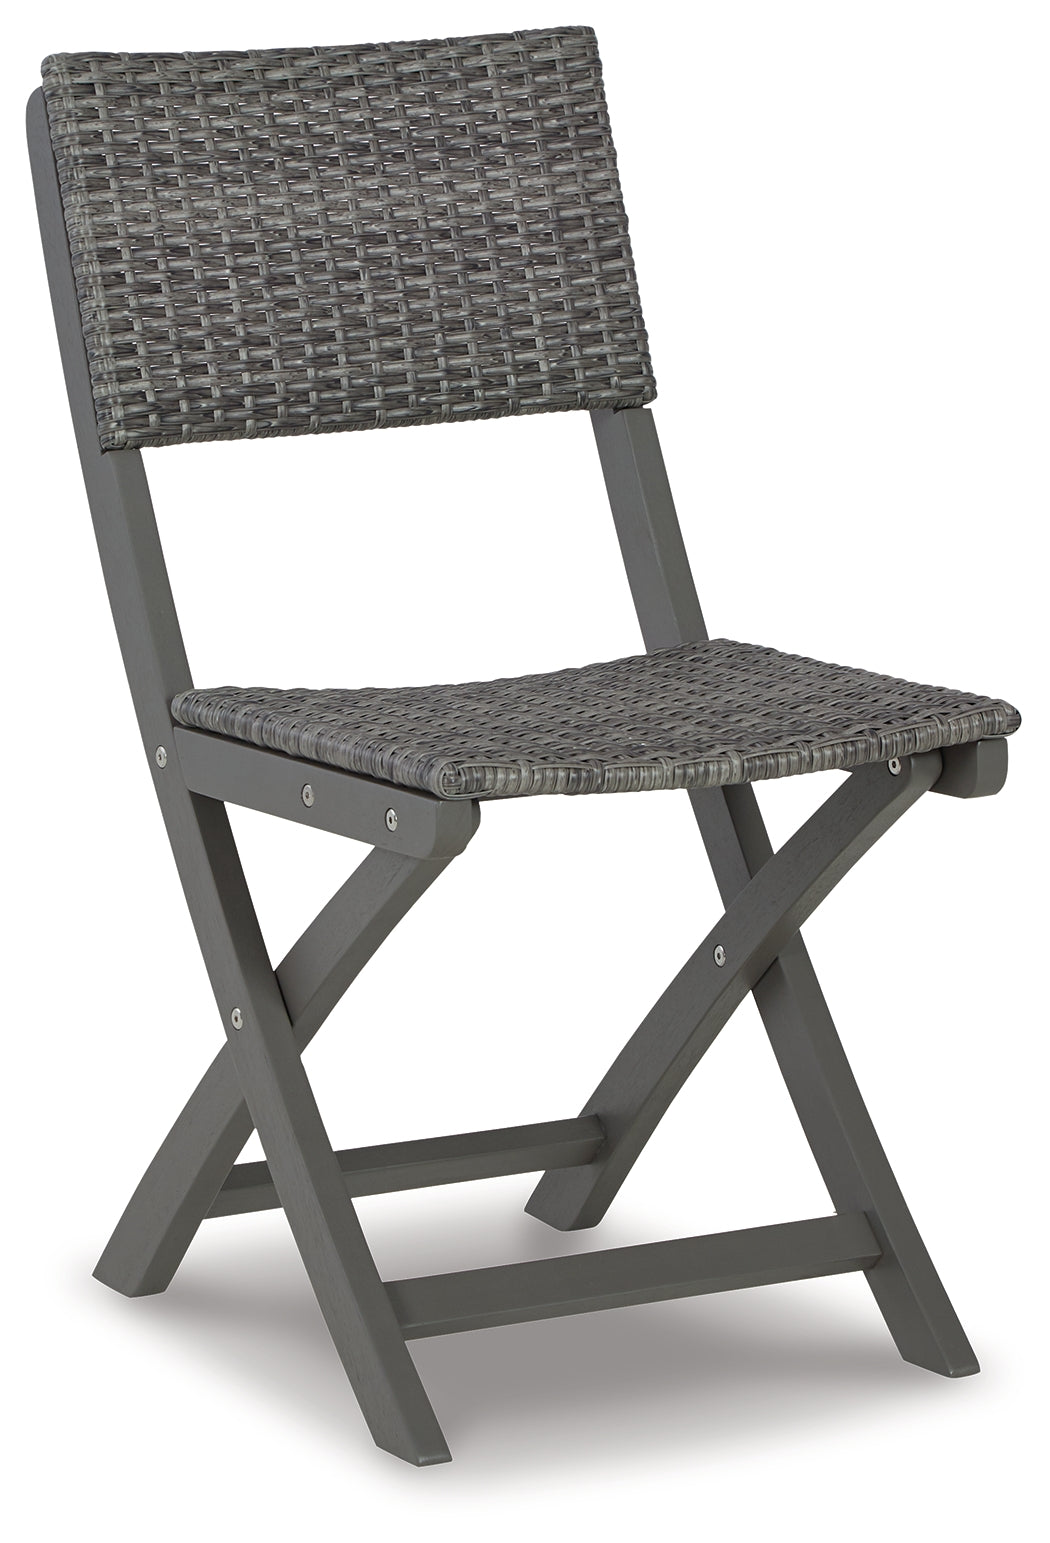 Safari Gray Peak Outdoor Table And Chairs (Set Of 3)